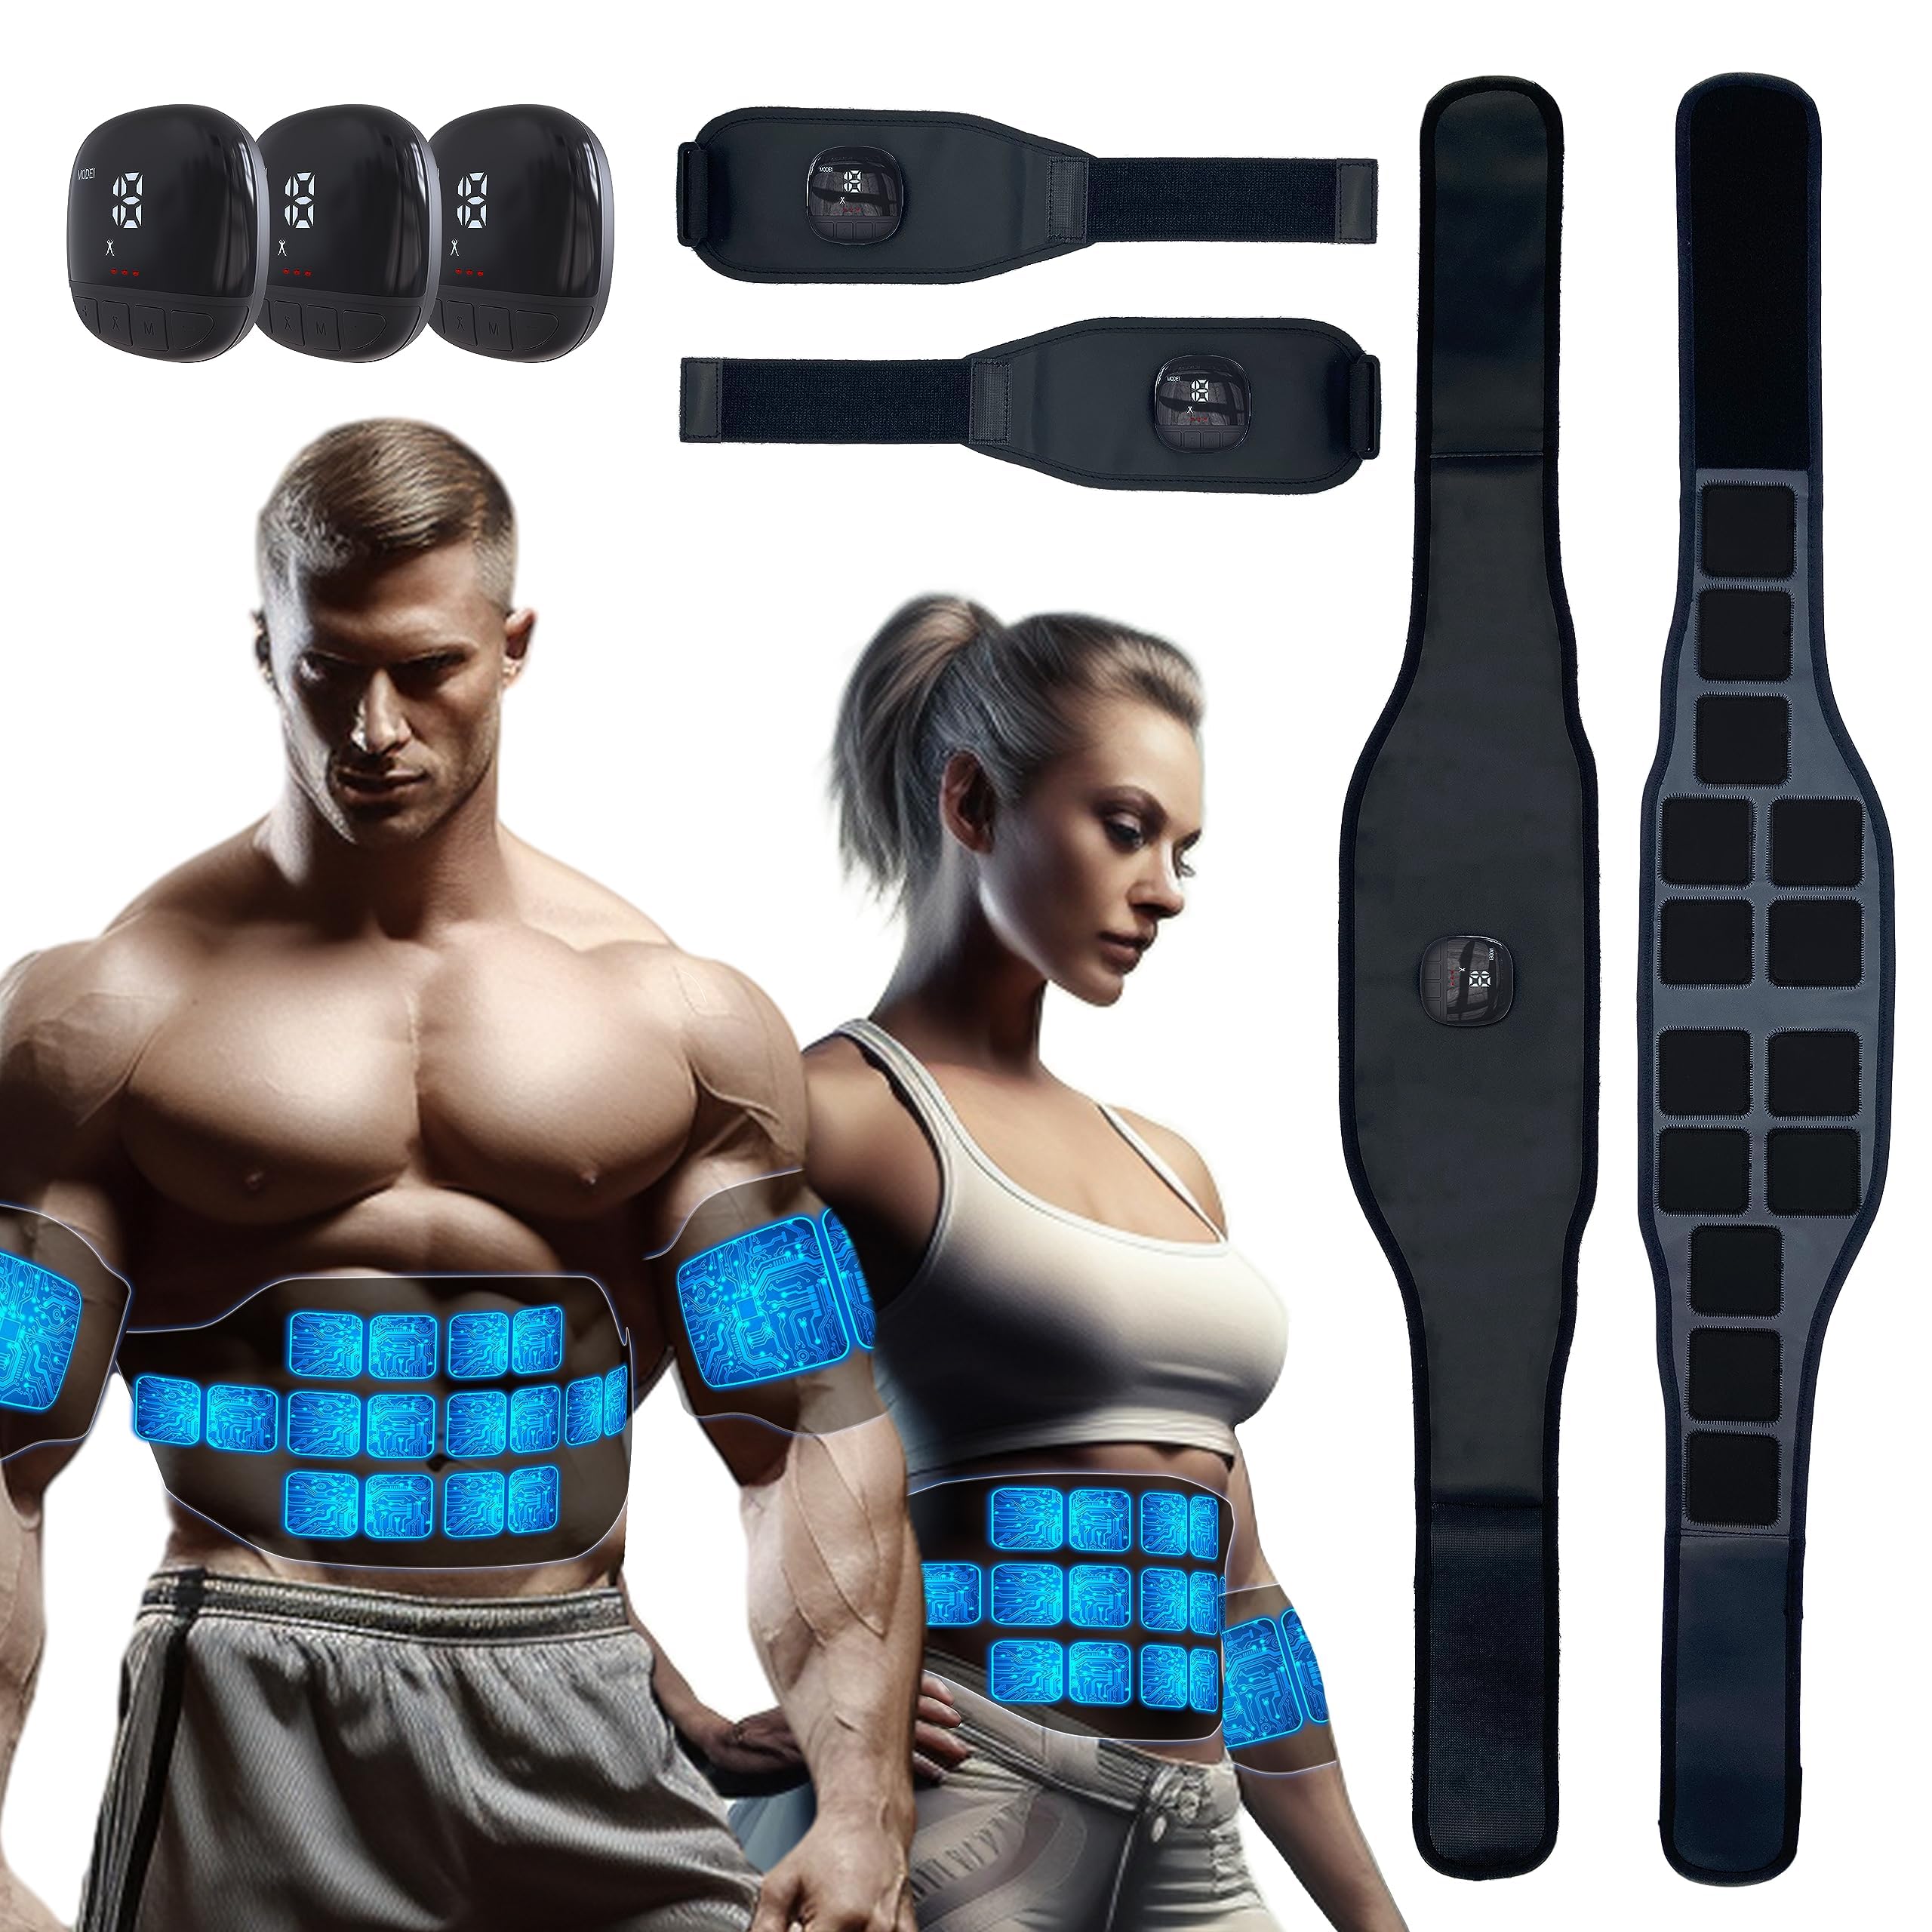 Emurdyon Ab Stimulator Belt MHD TENS EMS Muscle Stimulator Waist Trainer for WomanMan Abs Workout Equiptment Your Home